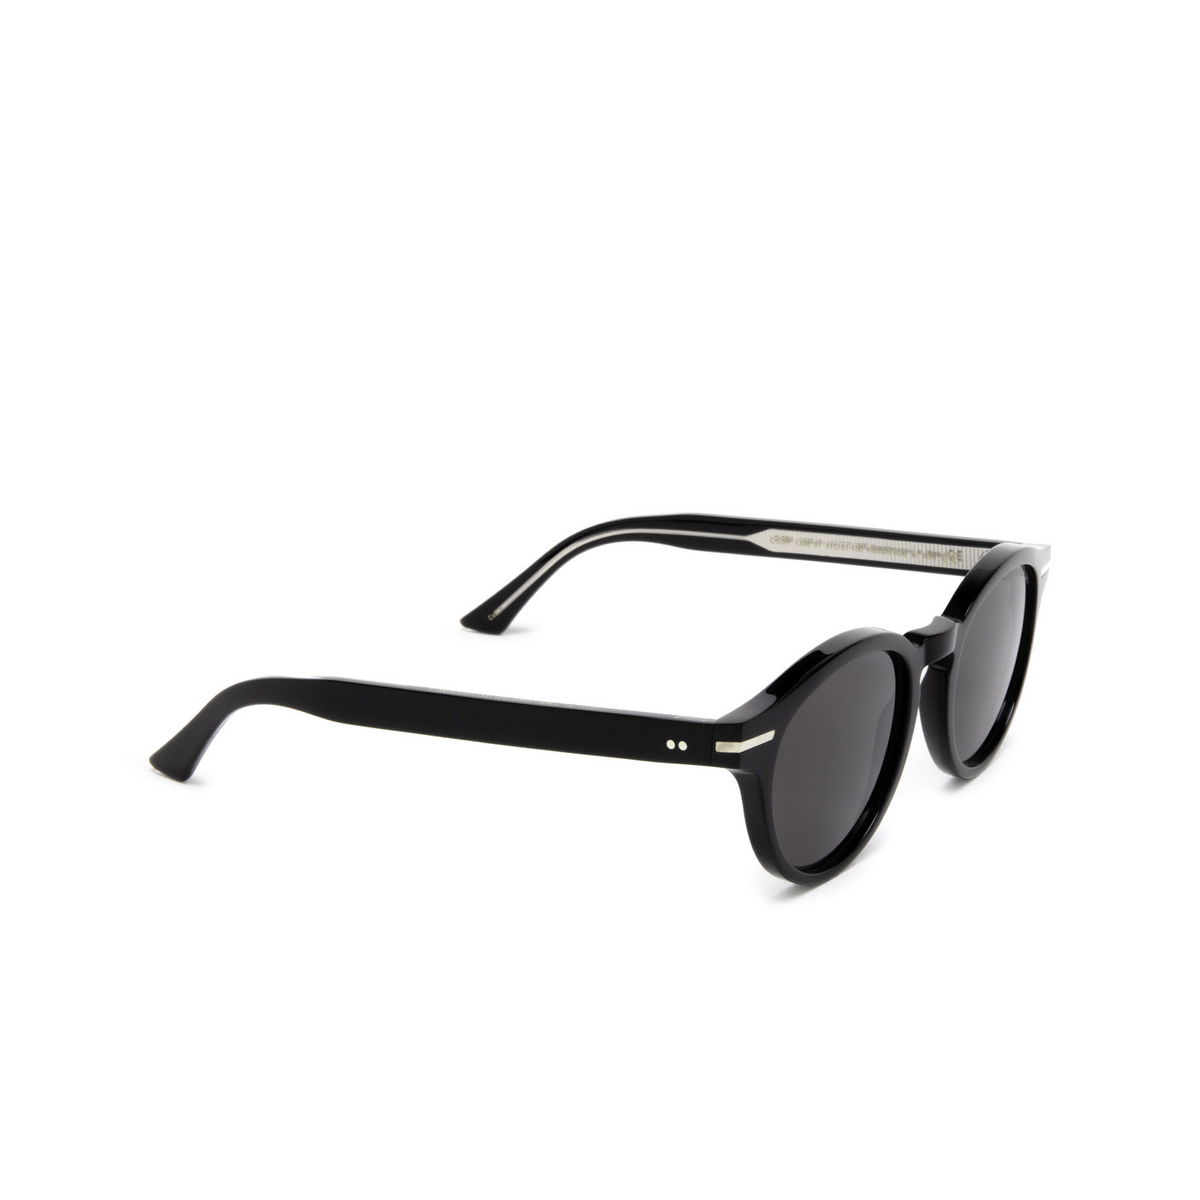 Cutler and Gross® Round Sunglasses: 1338 SUN color Black 01 - three-quarters view.